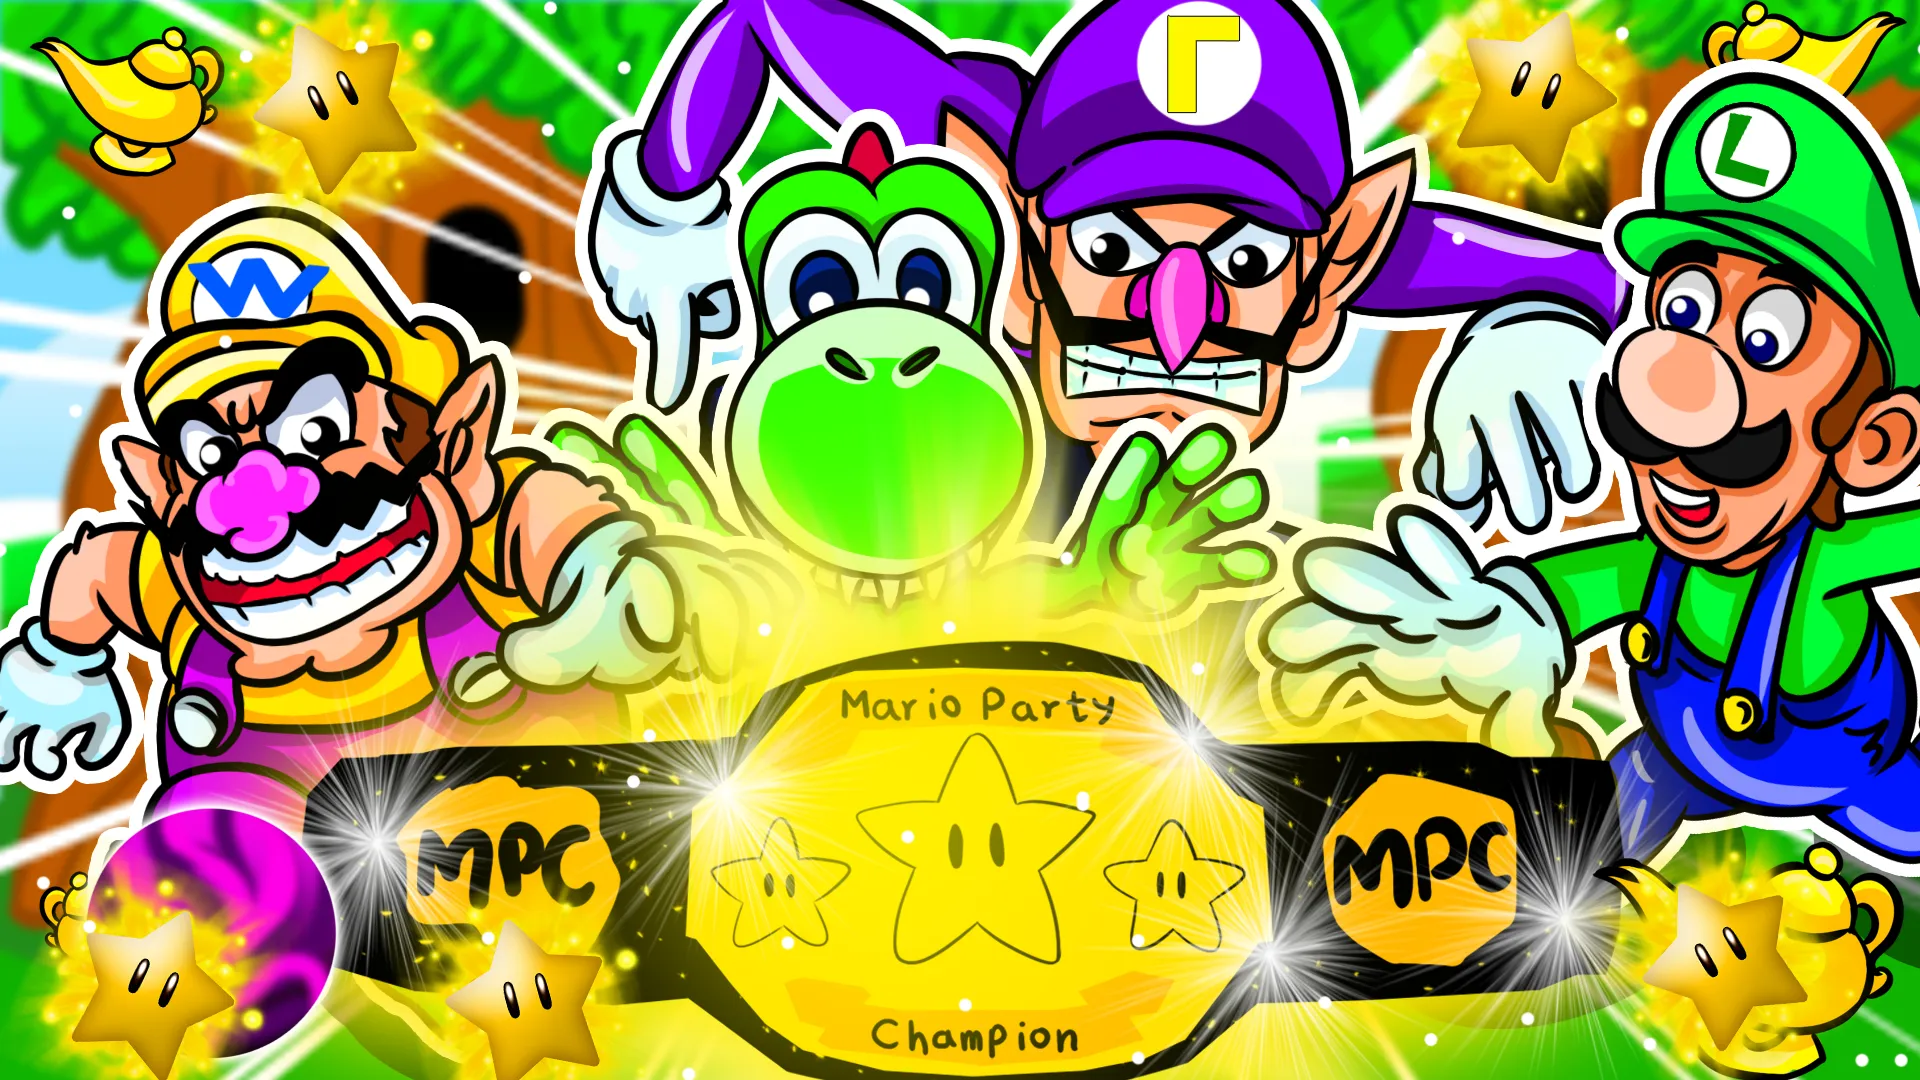 The Mario Party Championship